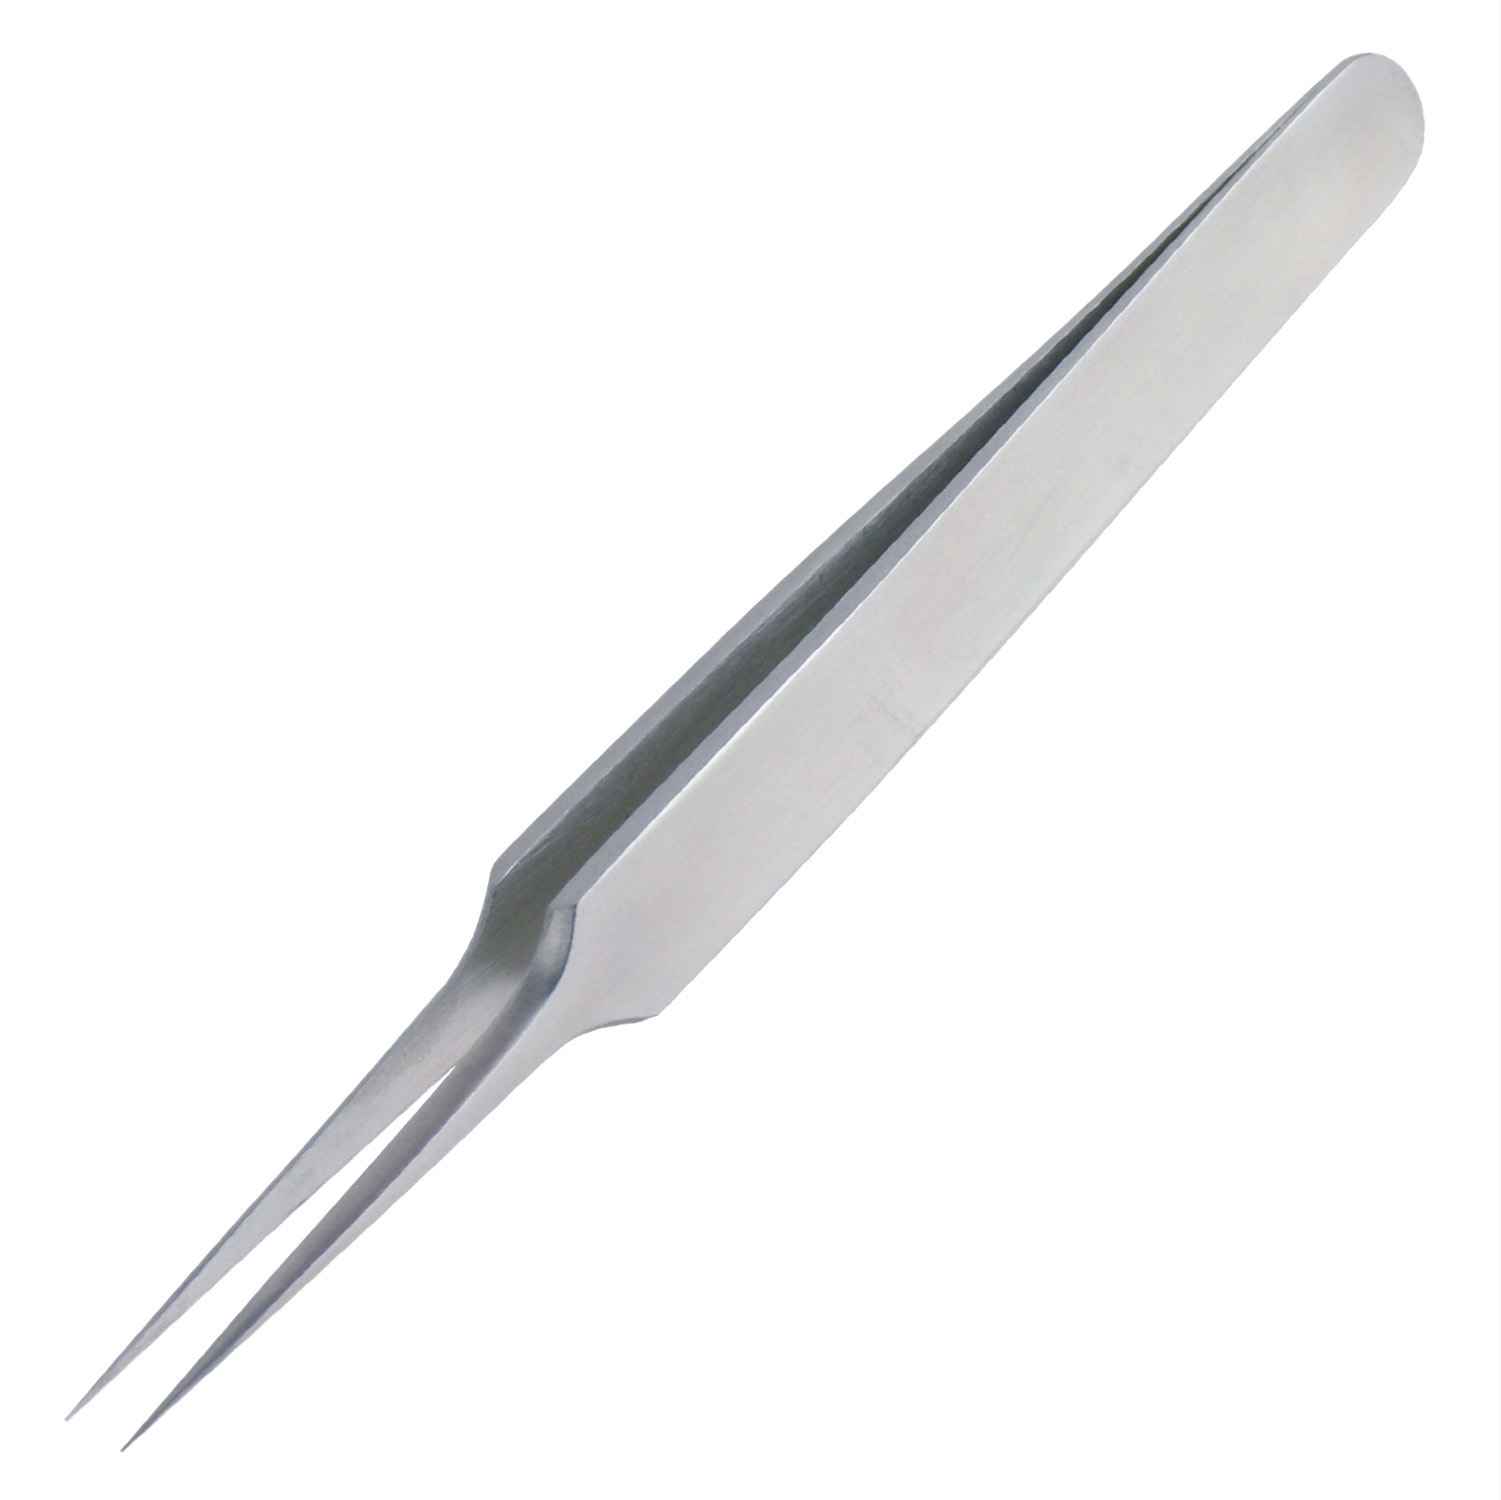 Iron Tweezers (Non-Magnetic and Extra Thin Type)